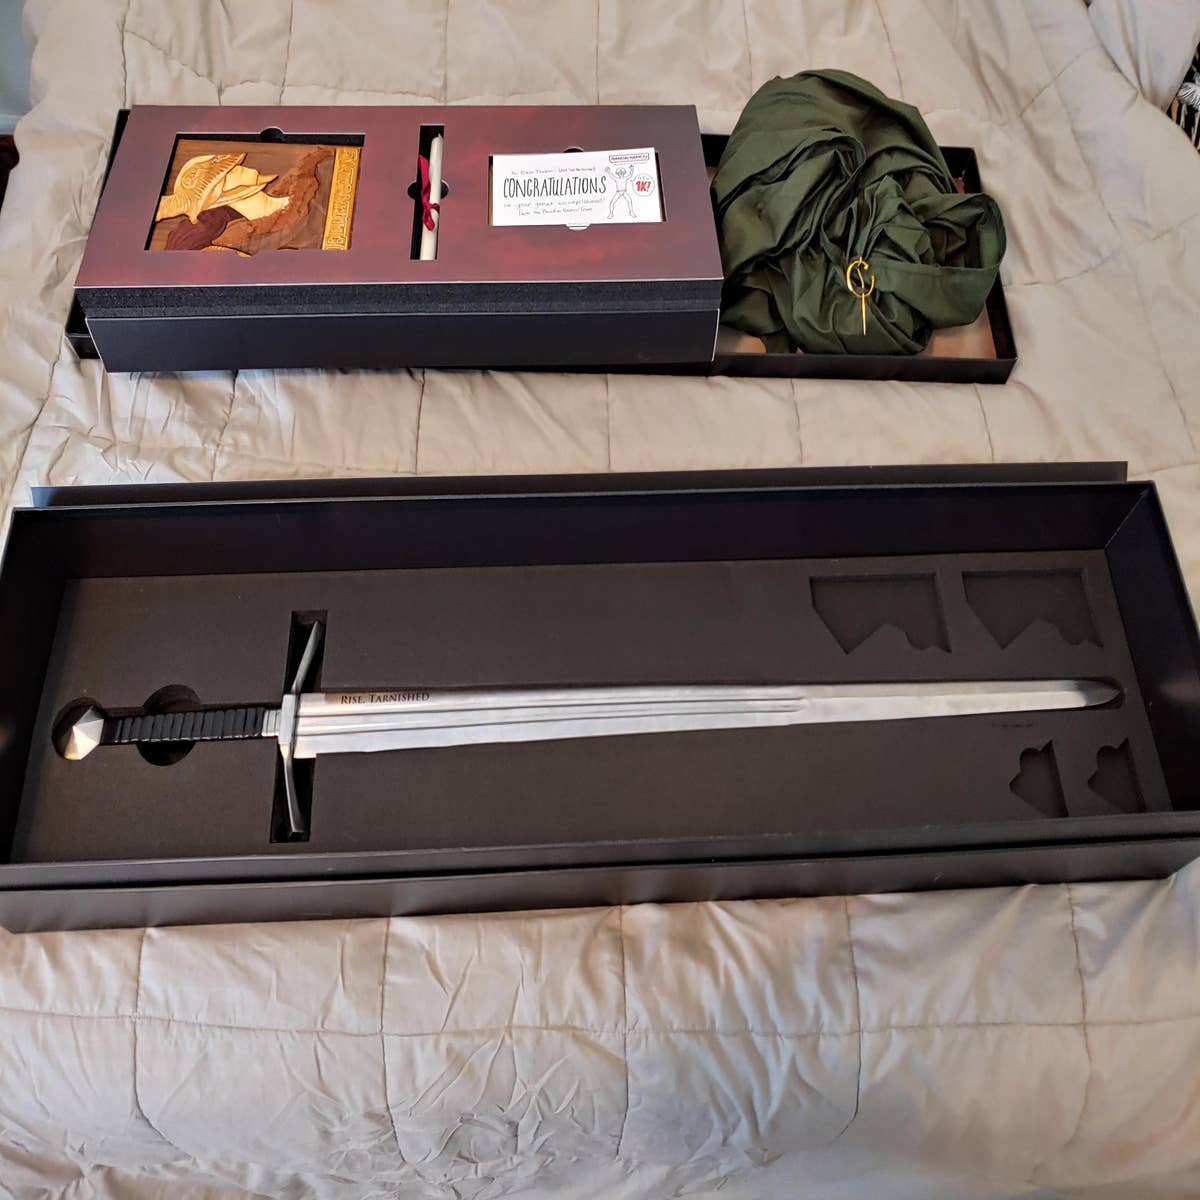 Elden Ring's 'Let Me Solo Her' Gifted Actual Sword By Makers